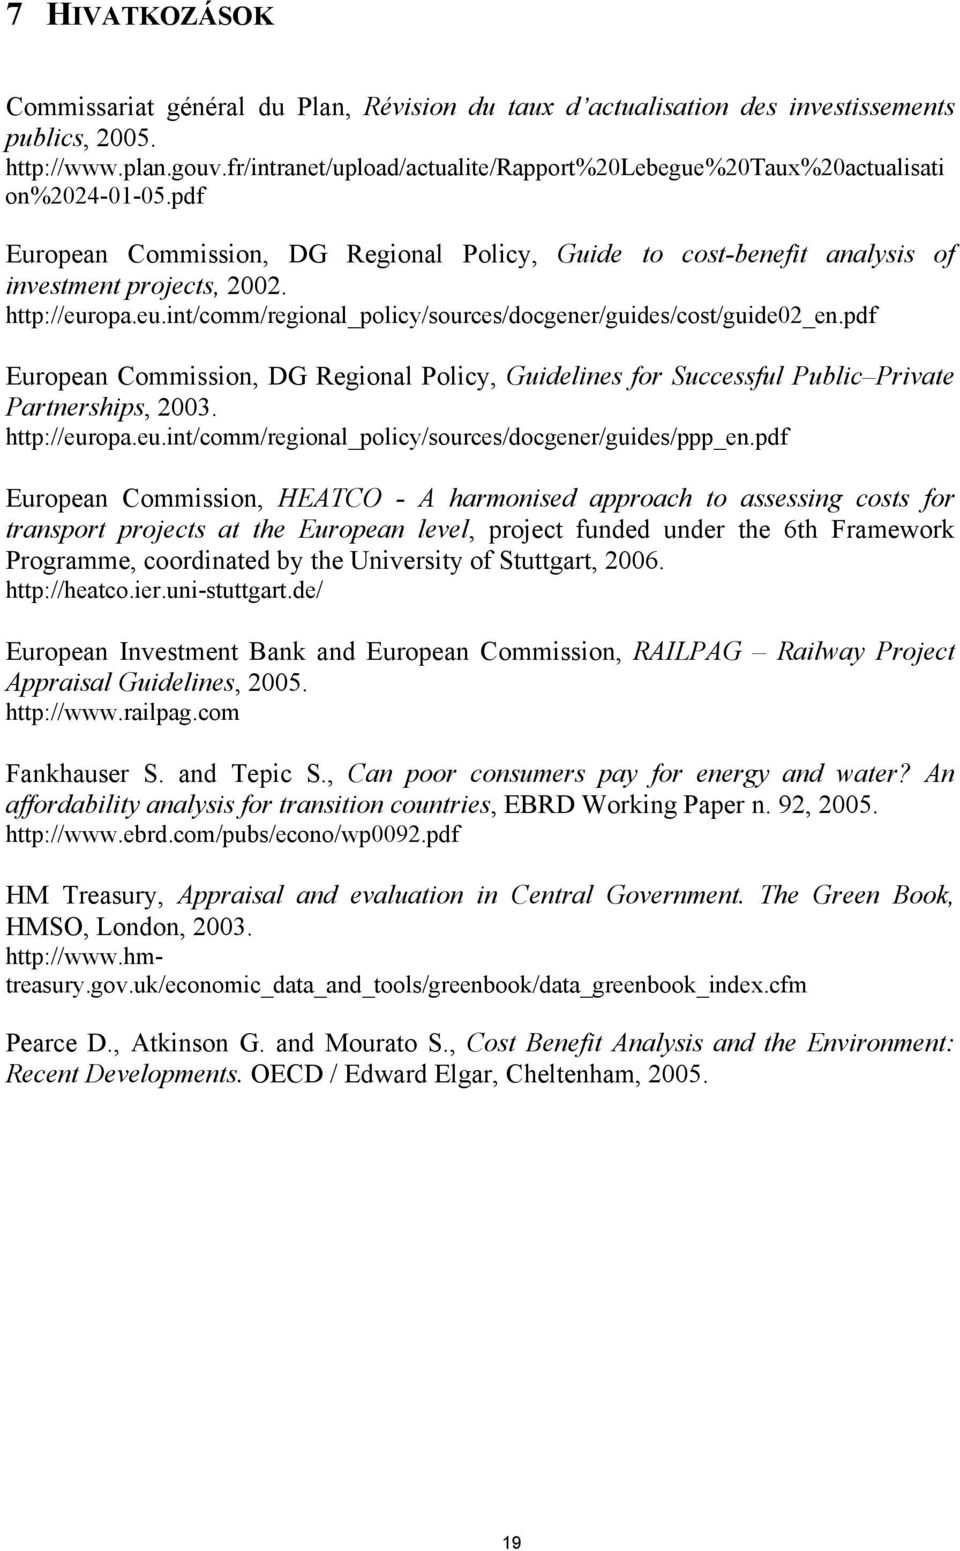 http://europa.eu.int/comm/regional_policy/sources/docgener/guides/cost/guide02_en.pdf European Commission, DG Regional Policy, Guidelines for Successful Public Private Partnerships, 2003.